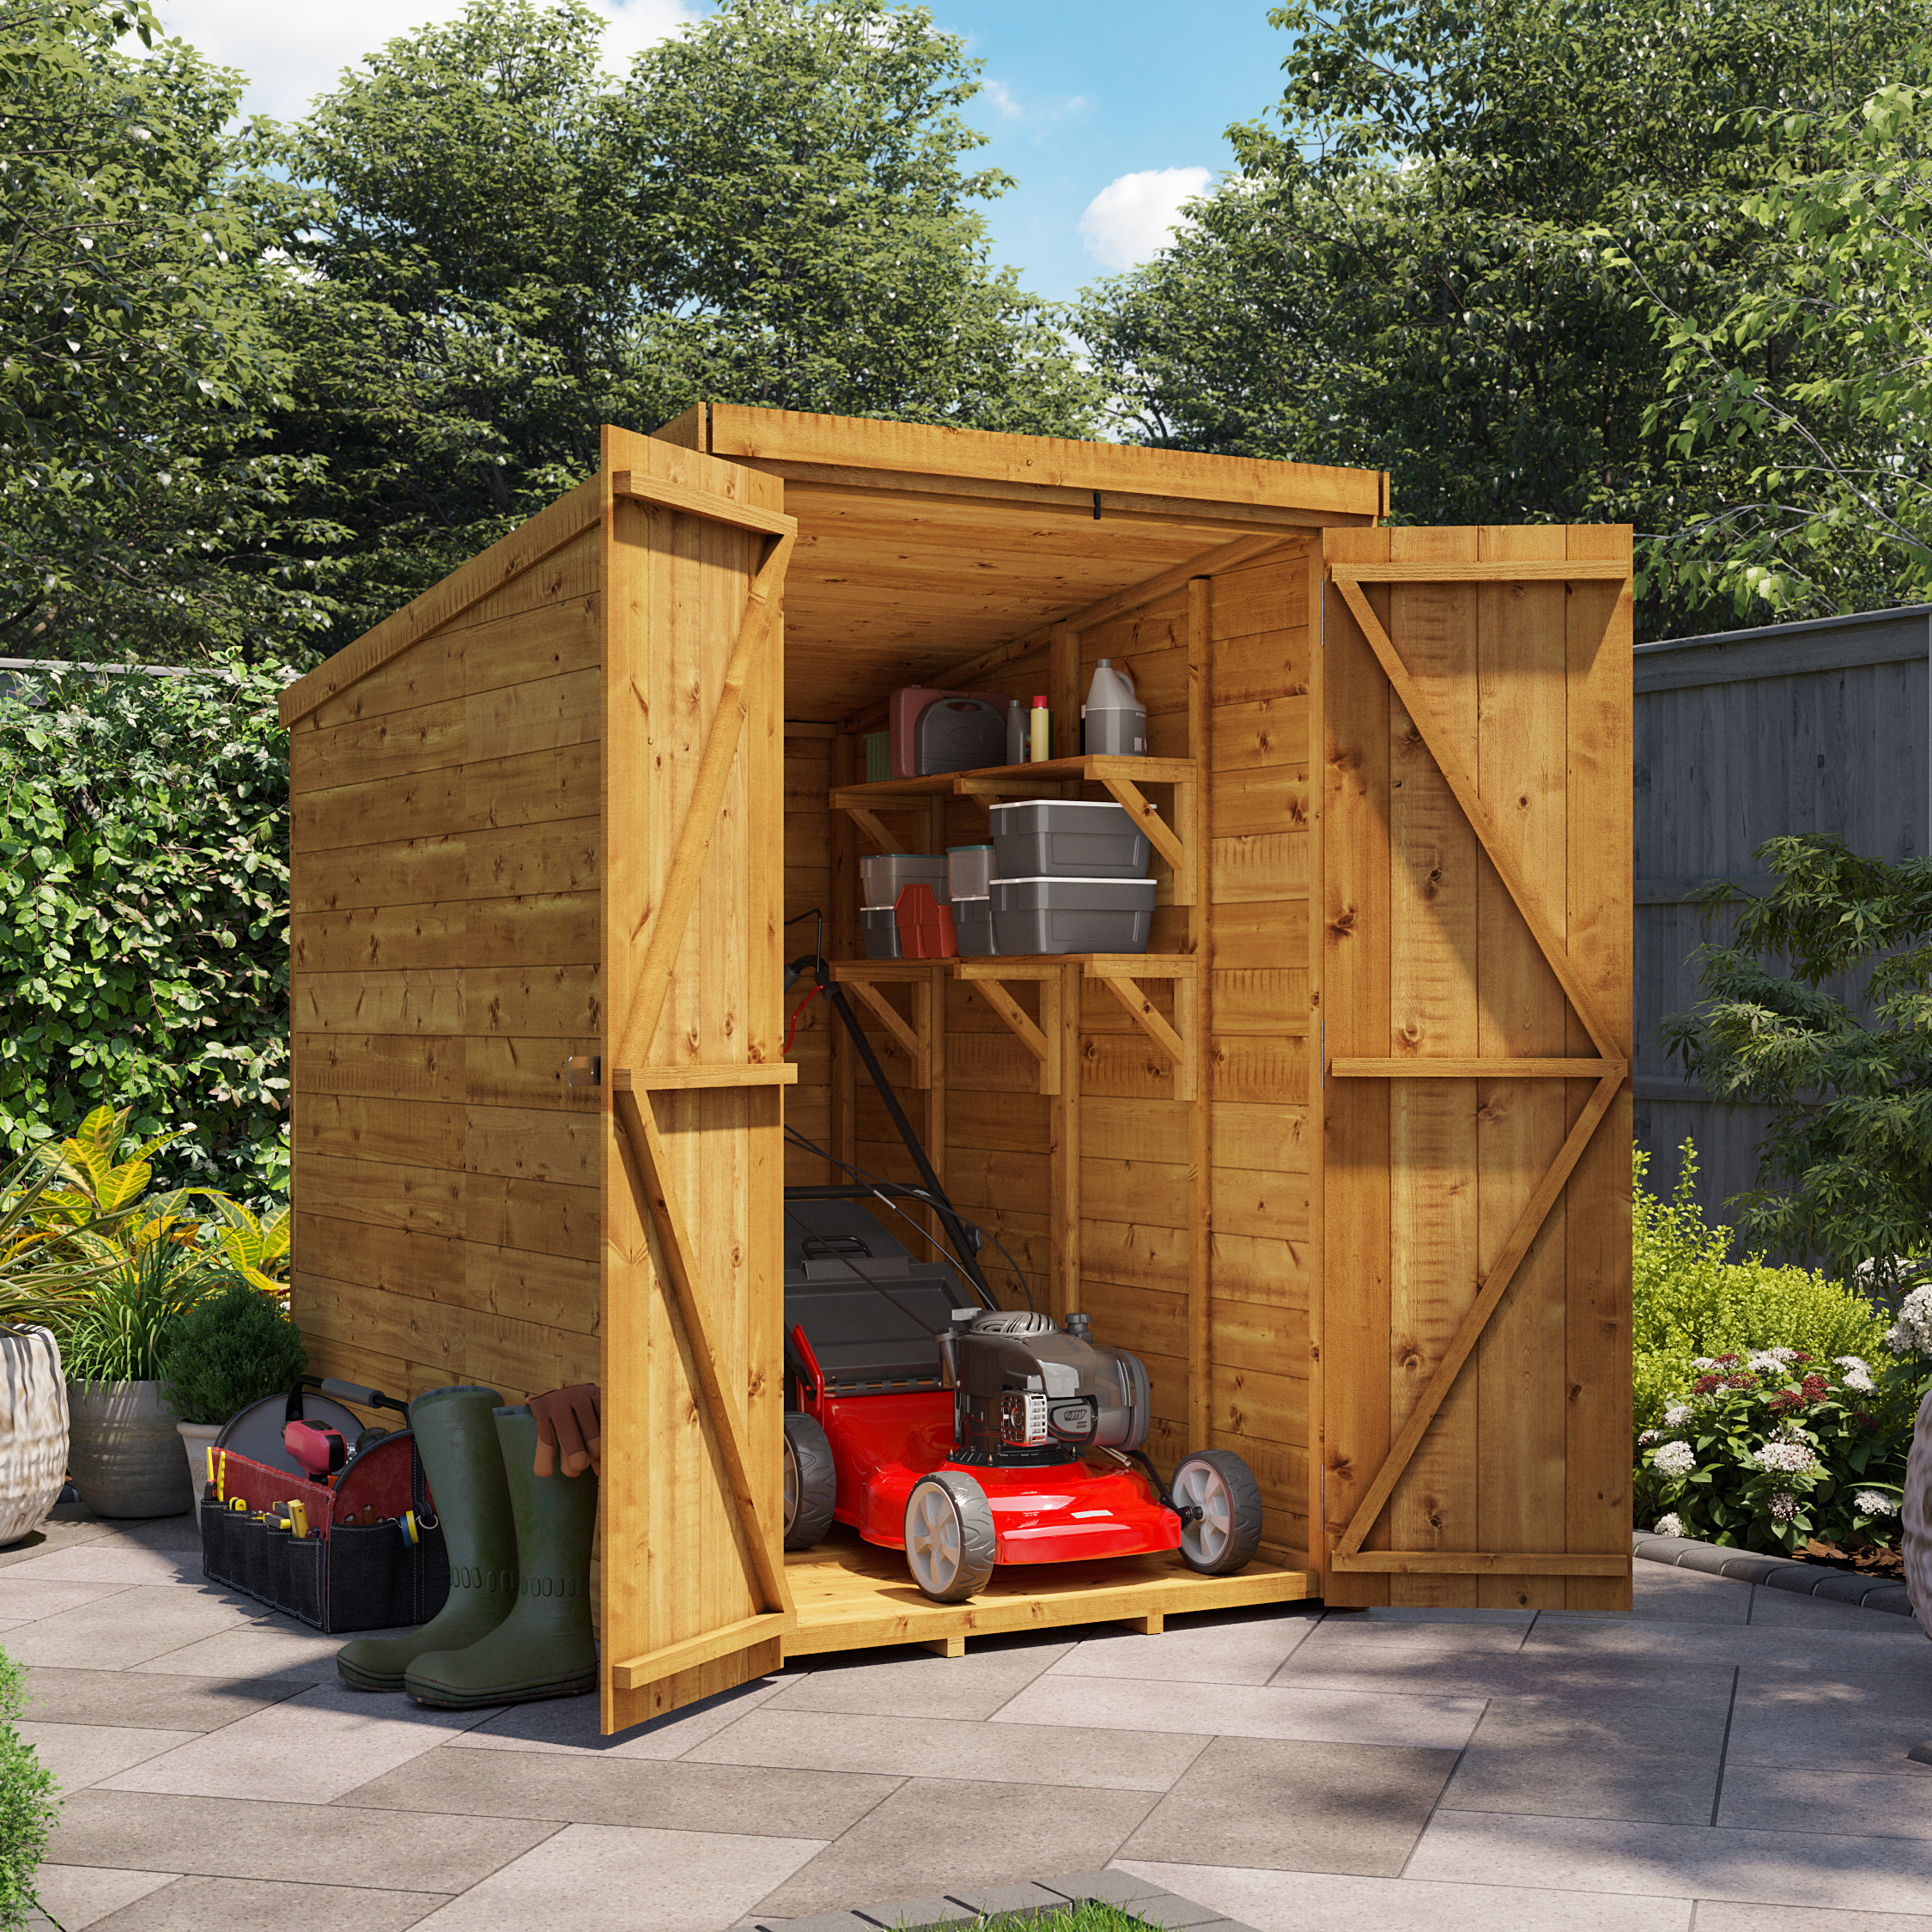 4 x 6 Shed - BillyOh Master Tongue and Groove Pent Shed - Pressure Treated Windowless 4x6 Wooden Garden Shed